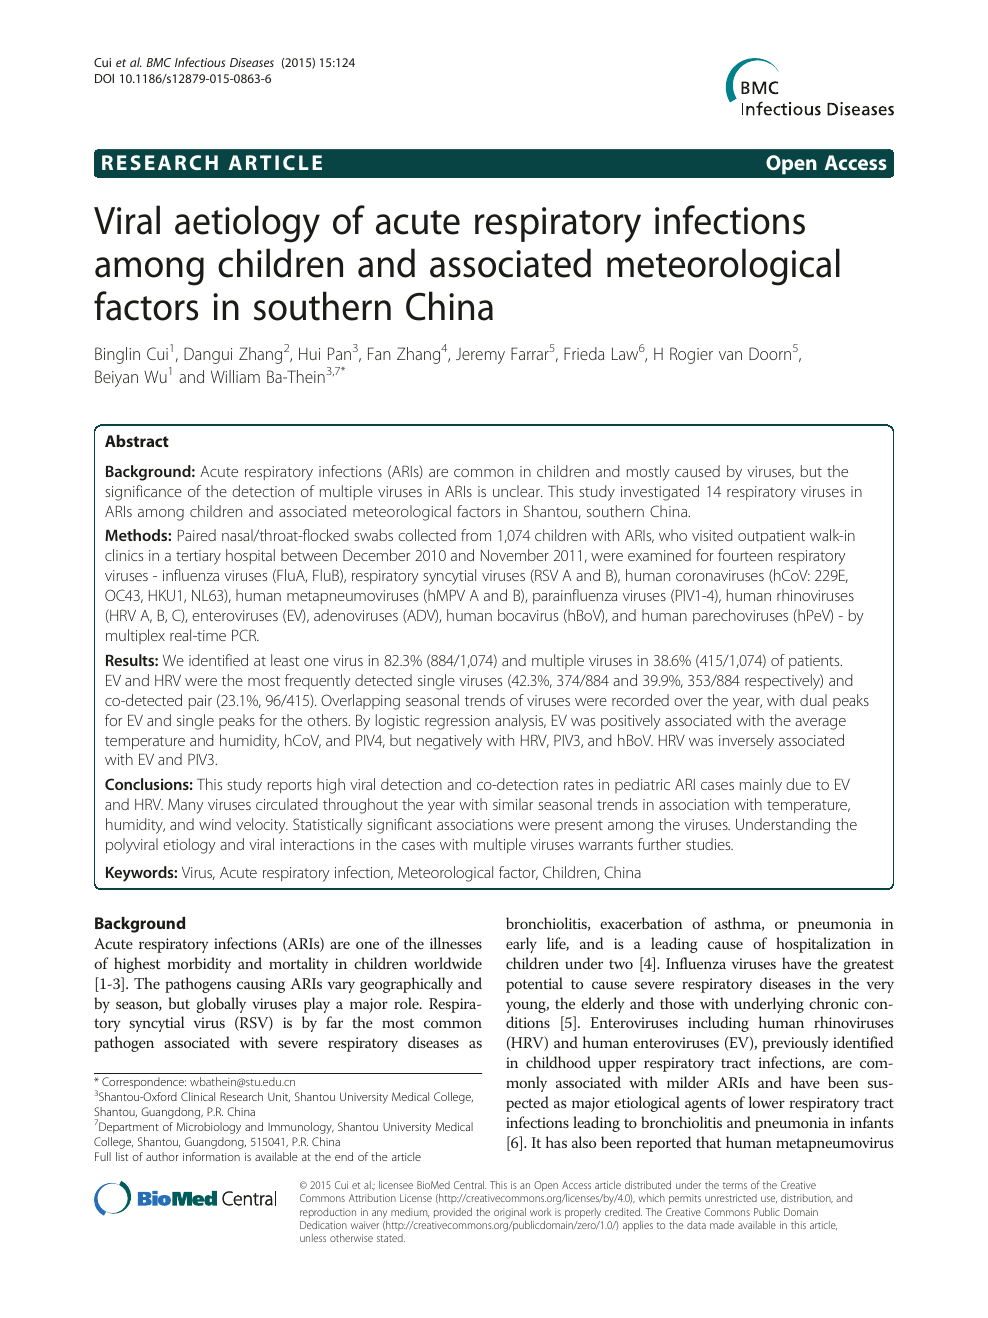 Viral Aetiology Of Acute Respiratory Infections Among Children And Associated Meteorological Factors In Southern China Topic Of Research Paper In Biological Sciences Download Scholarly Article Pdf And Read For Free On